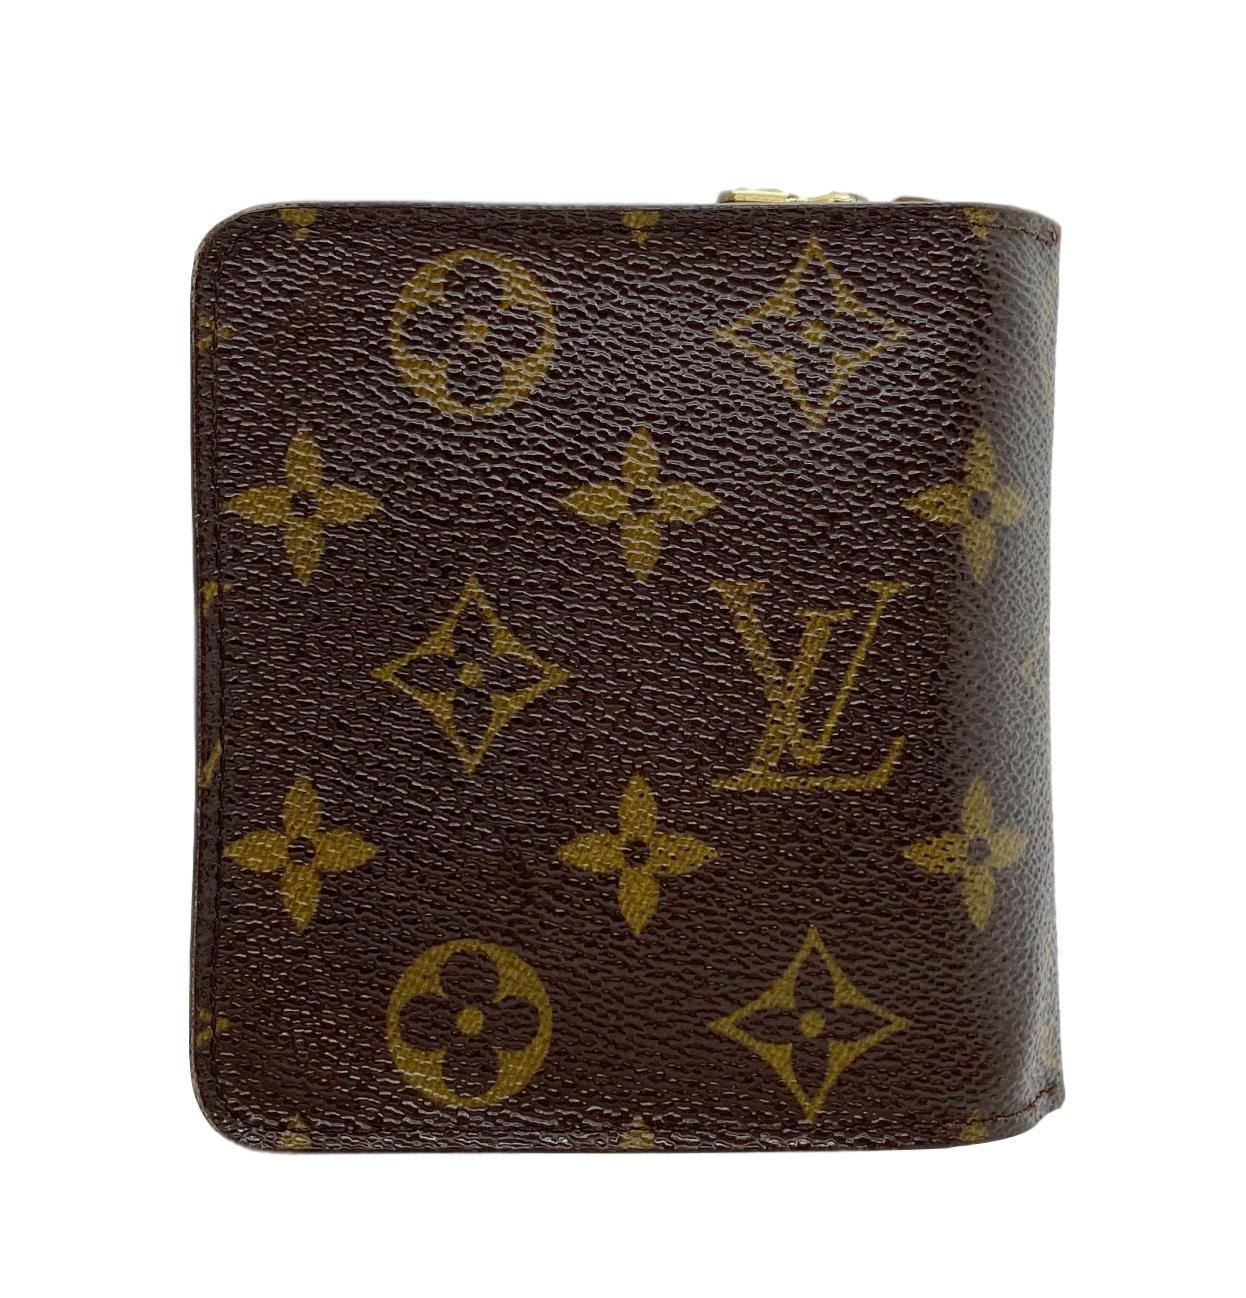 Vintage Louis Vuitton compact zip PM French Purse wallet in brown and tan monogram coated
canvas. Dated, CA0075, Spain – July 2005. Wallet has brass hardware, snap closure at front
opening to brown Taiga leather lined interior. Interior has a single